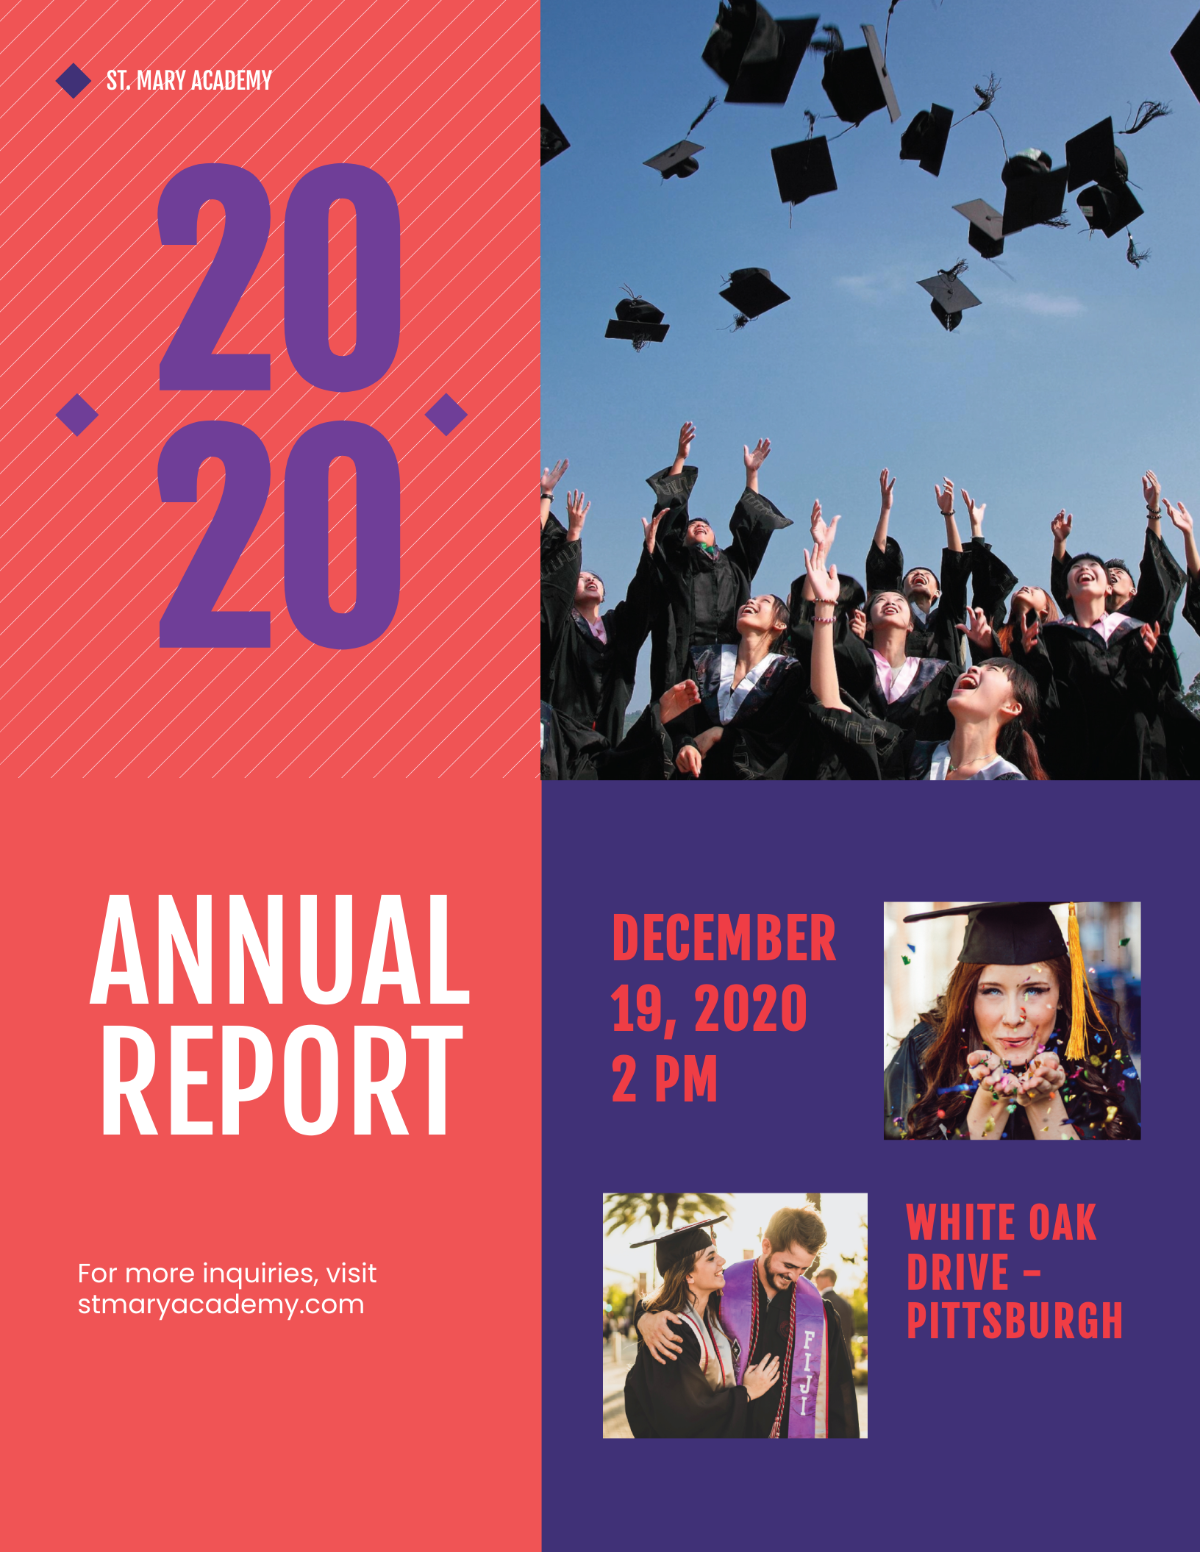 Annual Report Flyer